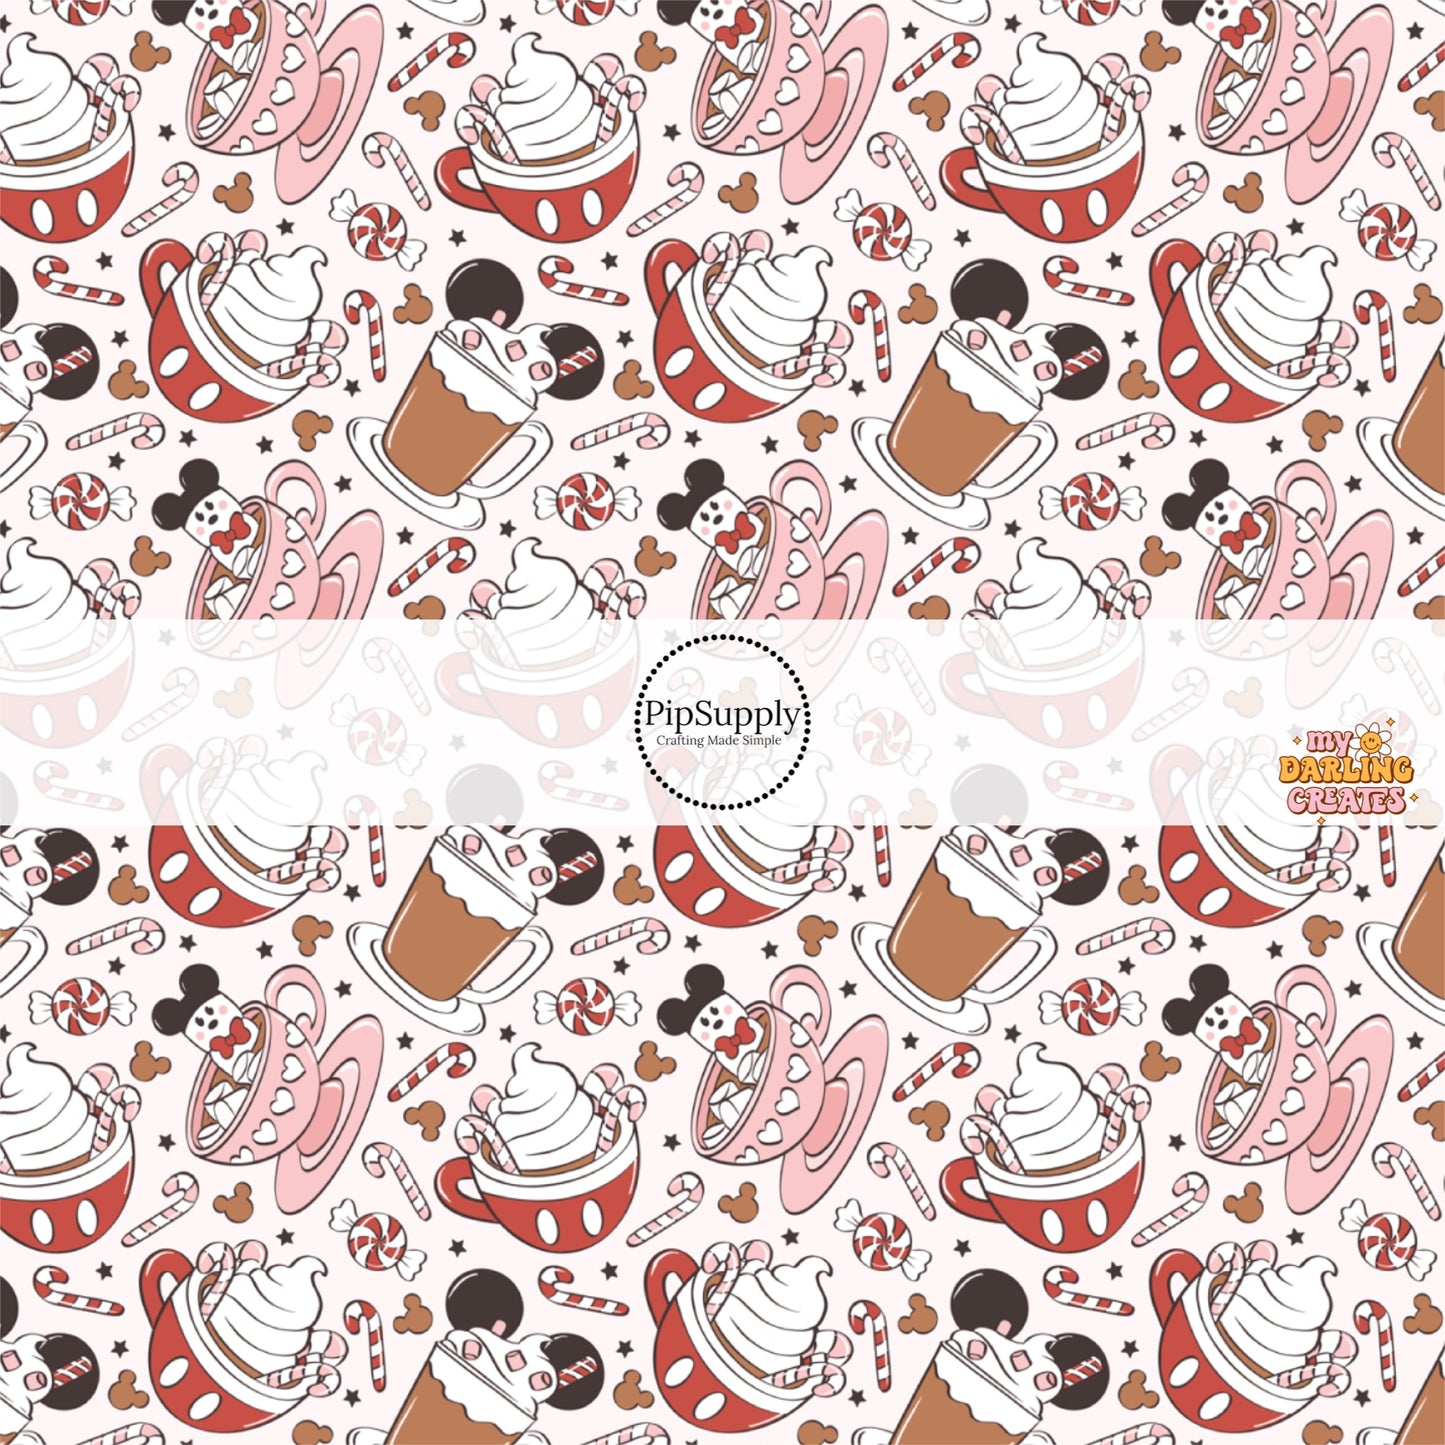 Mouse ear hot cocoa and holiday drinks on cream fabric by the yard.